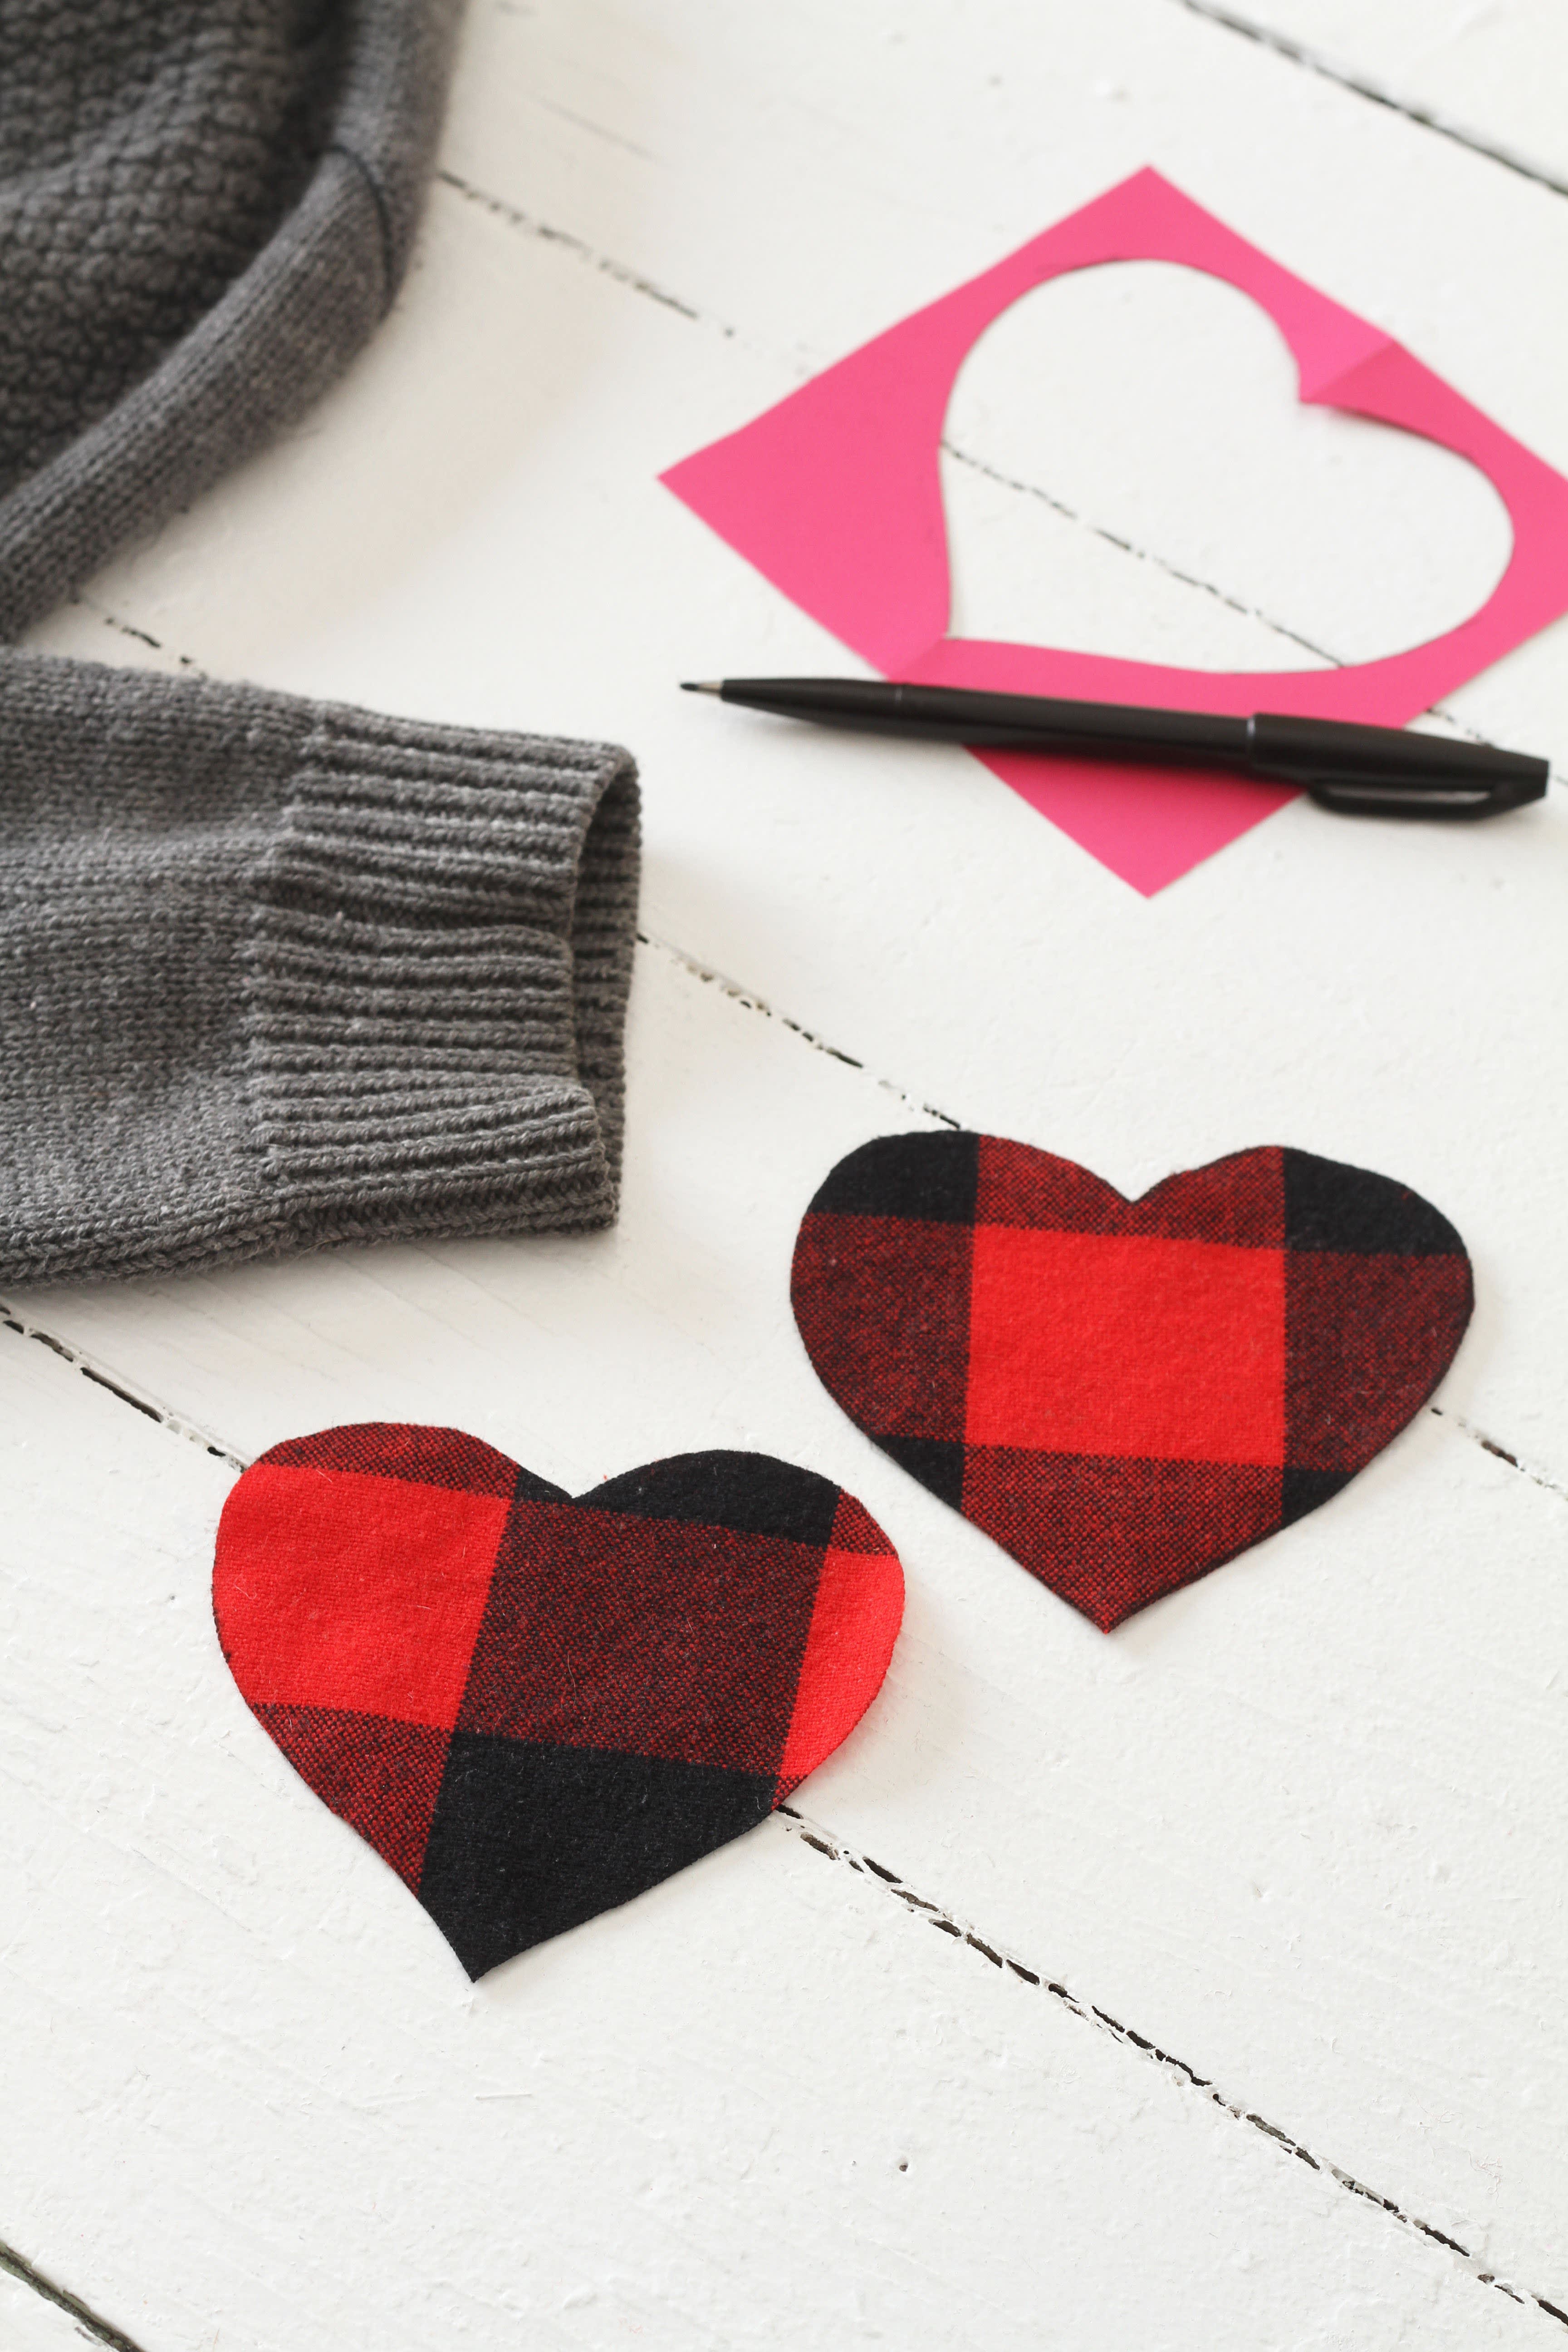 No-Sew Heart Elbow Patches - A Night Owl Blog